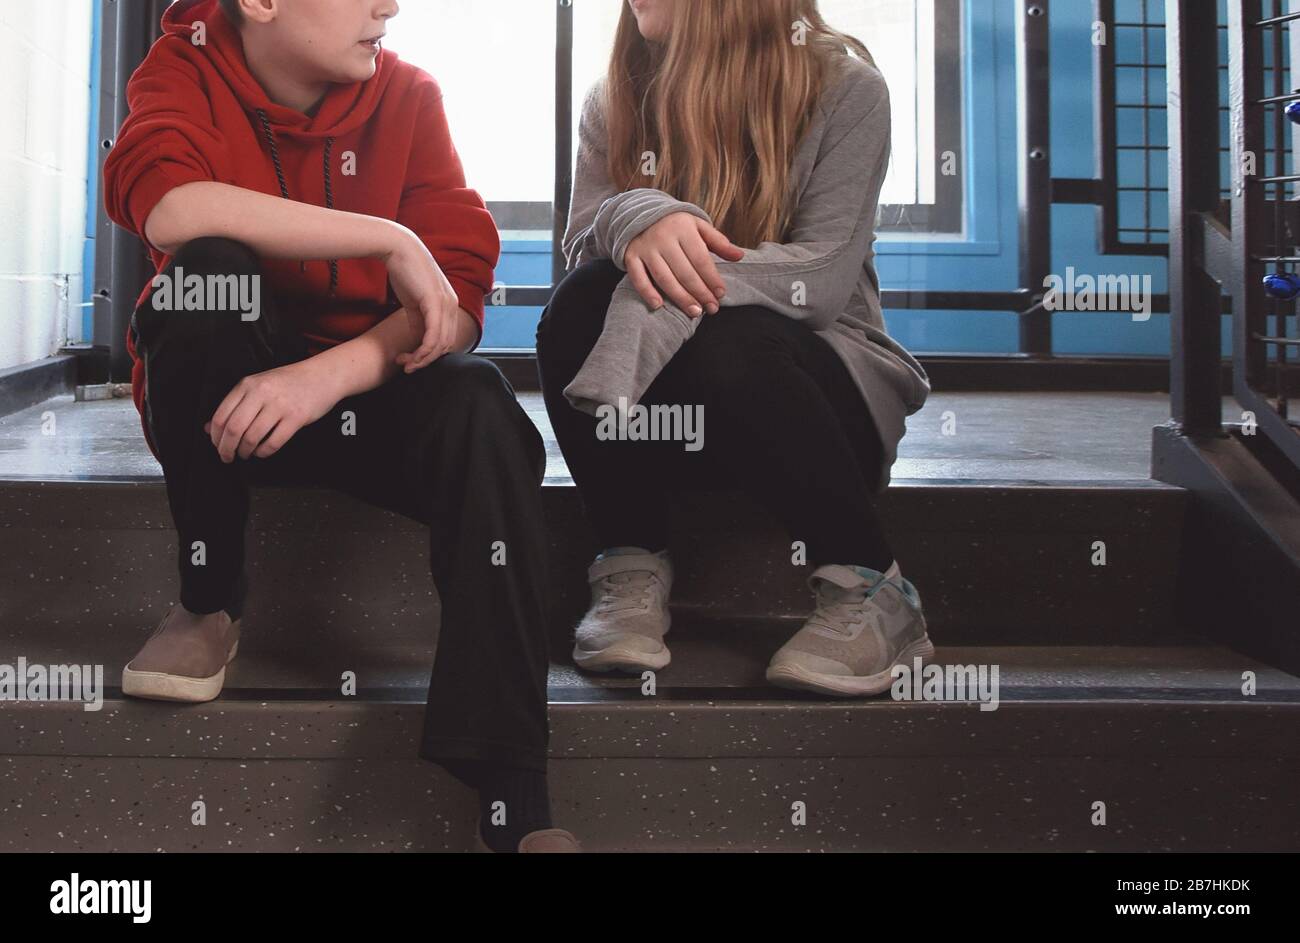 A boy and girl student are sitting in a hallway on stairs talking for a youth communication concept. Stock Photo